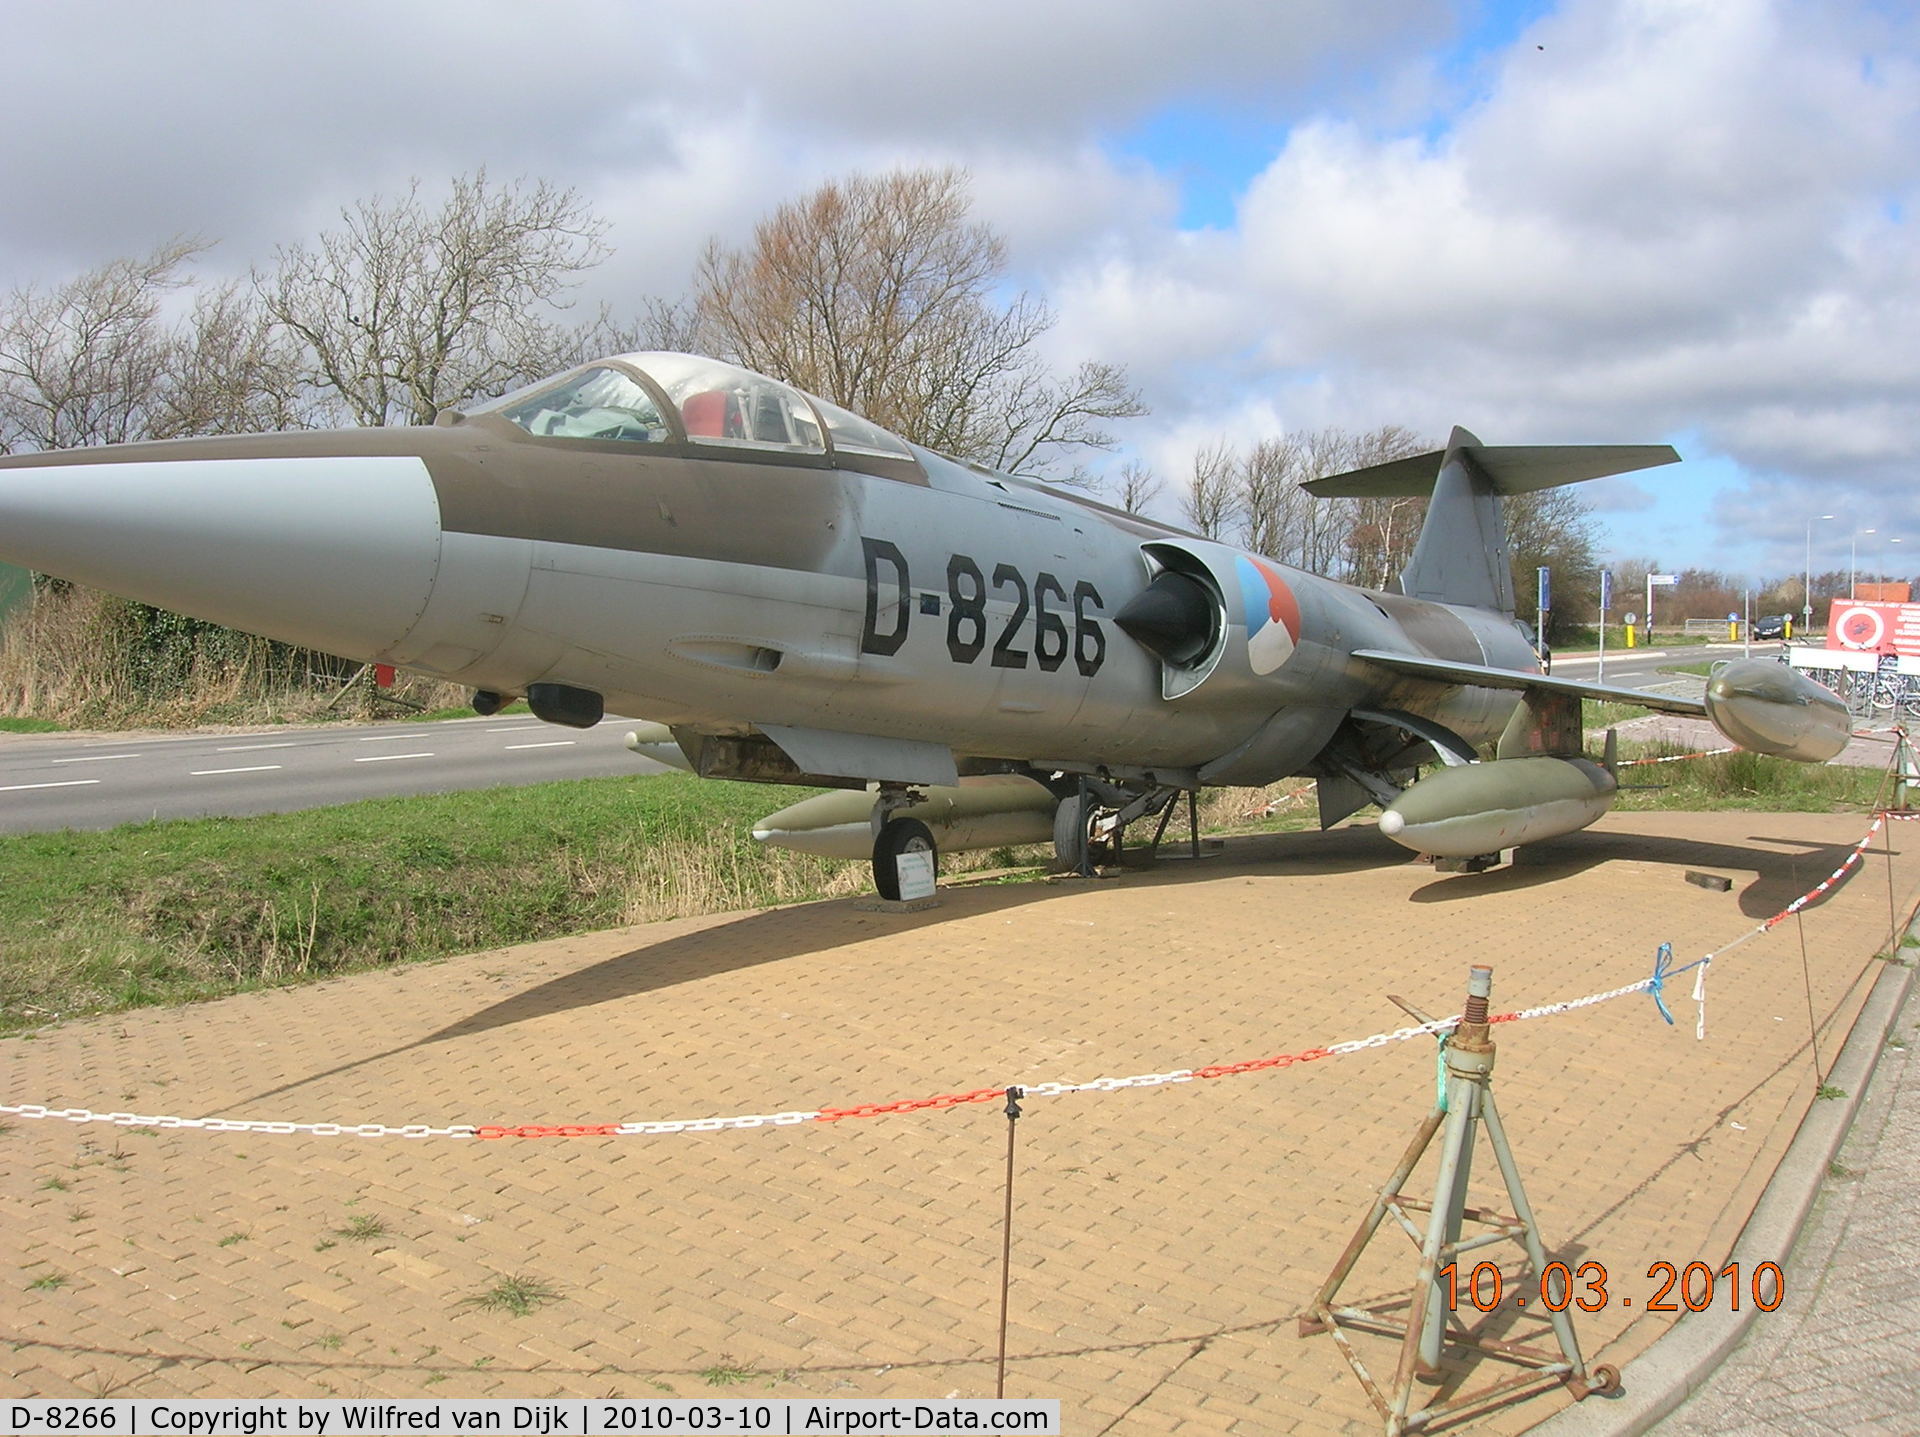 D-8266, Lockheed F-104G Starfighter C/N 683-8266, Picture taken on Texel, however the plane is now stored at Soesterberg Airport